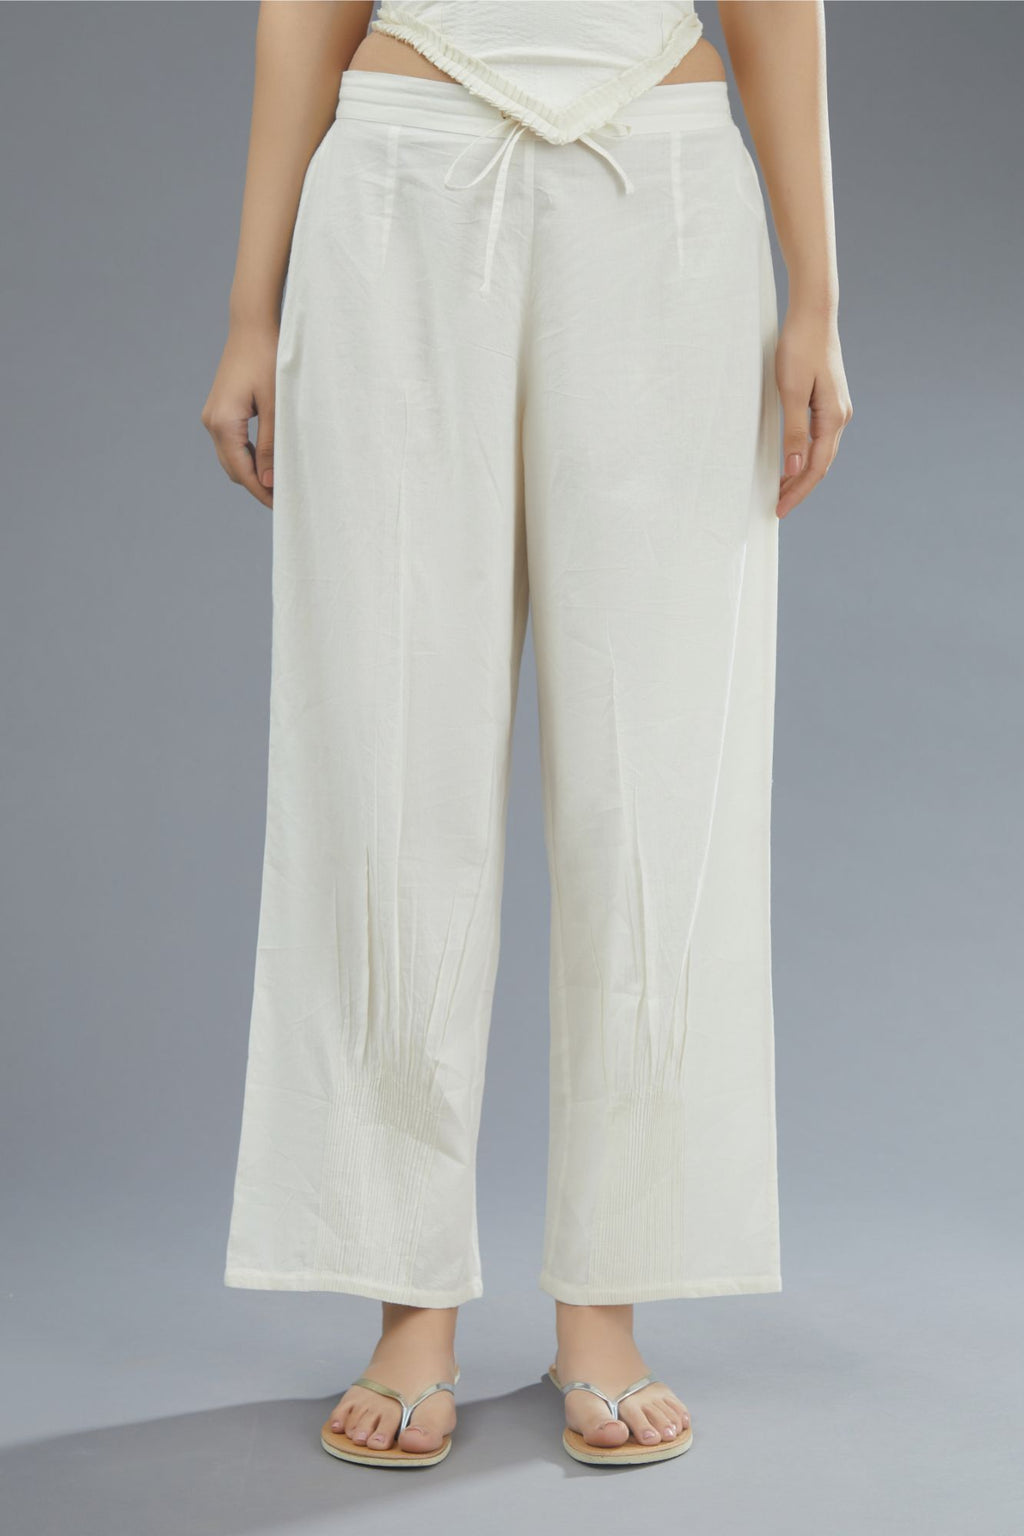 Off white straight pants detailed with pintucks at bottom.